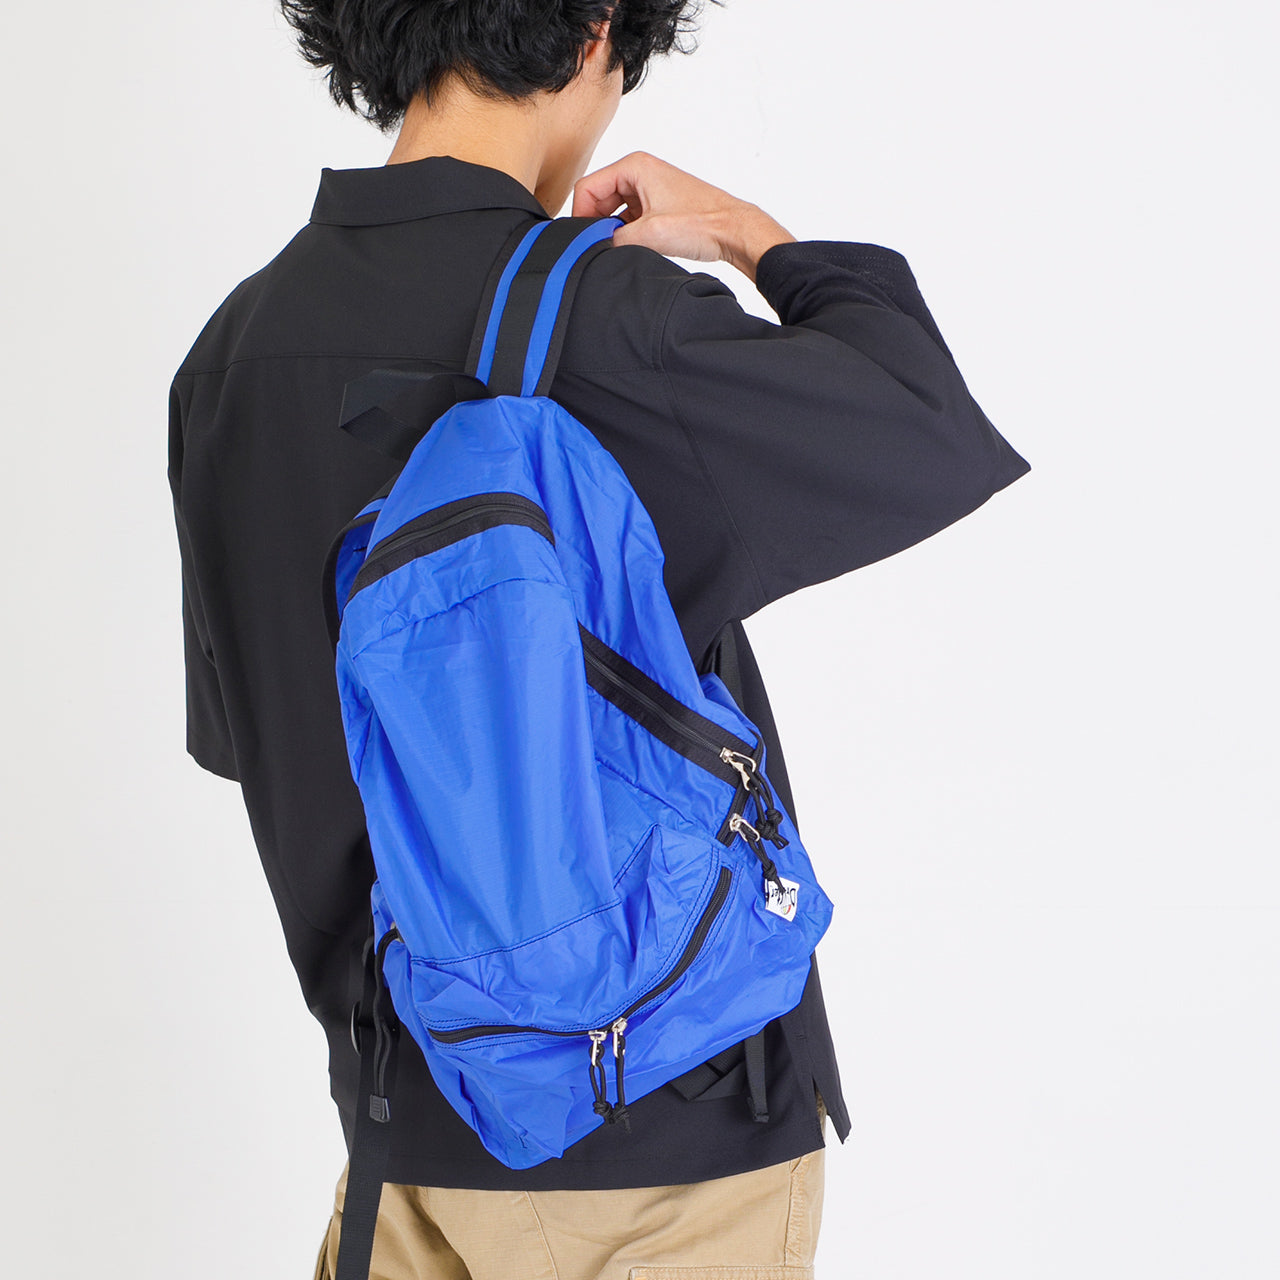 FLY PACK リュック